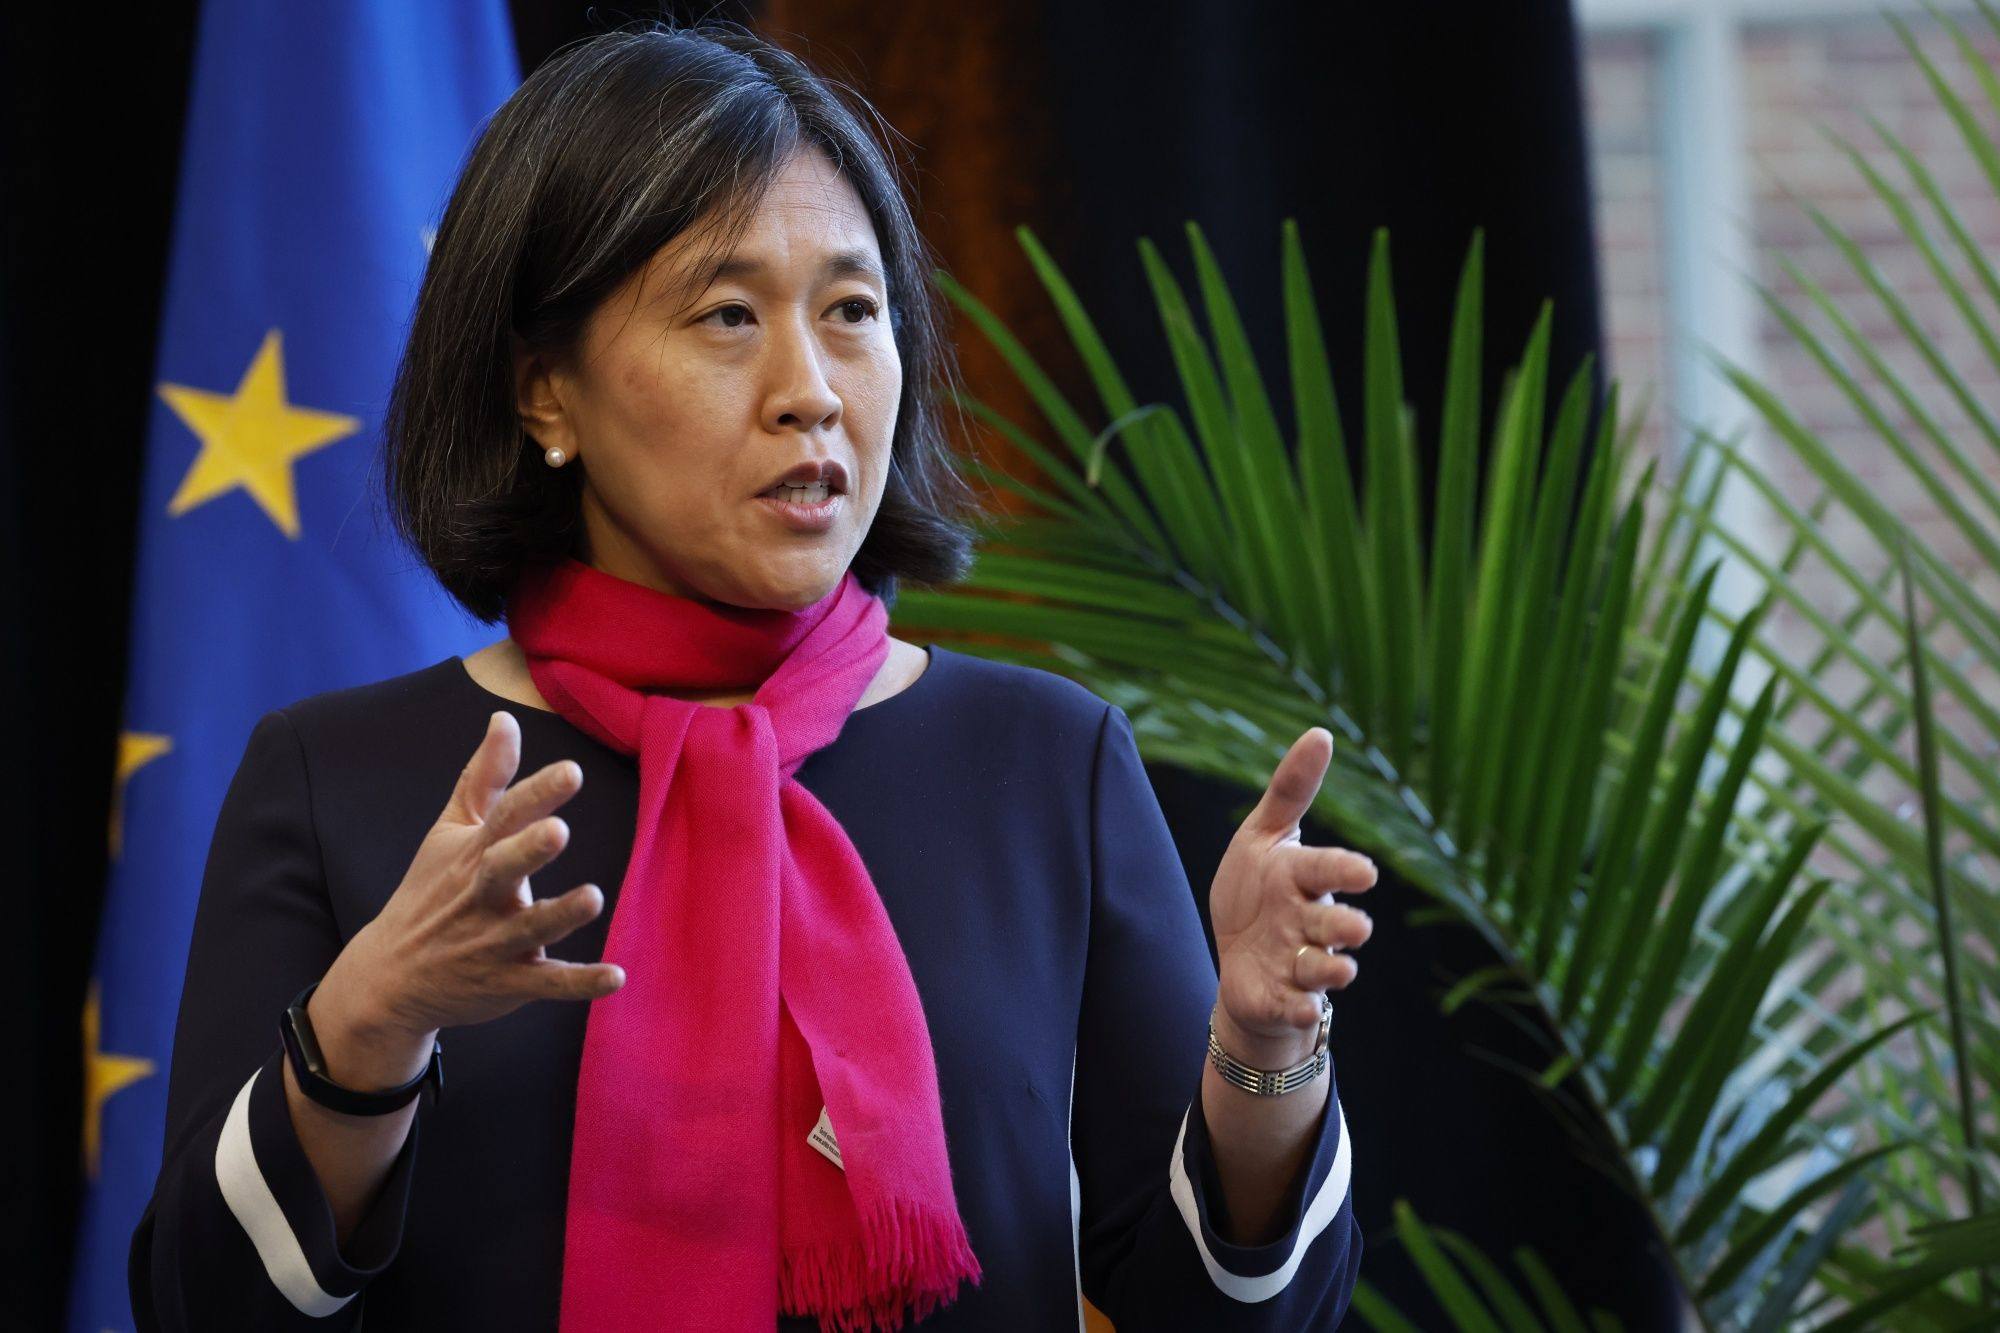 US Trade Representative Katherine Tai criticised an earlier WTO ruling on tariffs last week, saying it overstepped its authority by “creating requirements ... for what is or is not a national-security decision”. Photo: Bloomberg